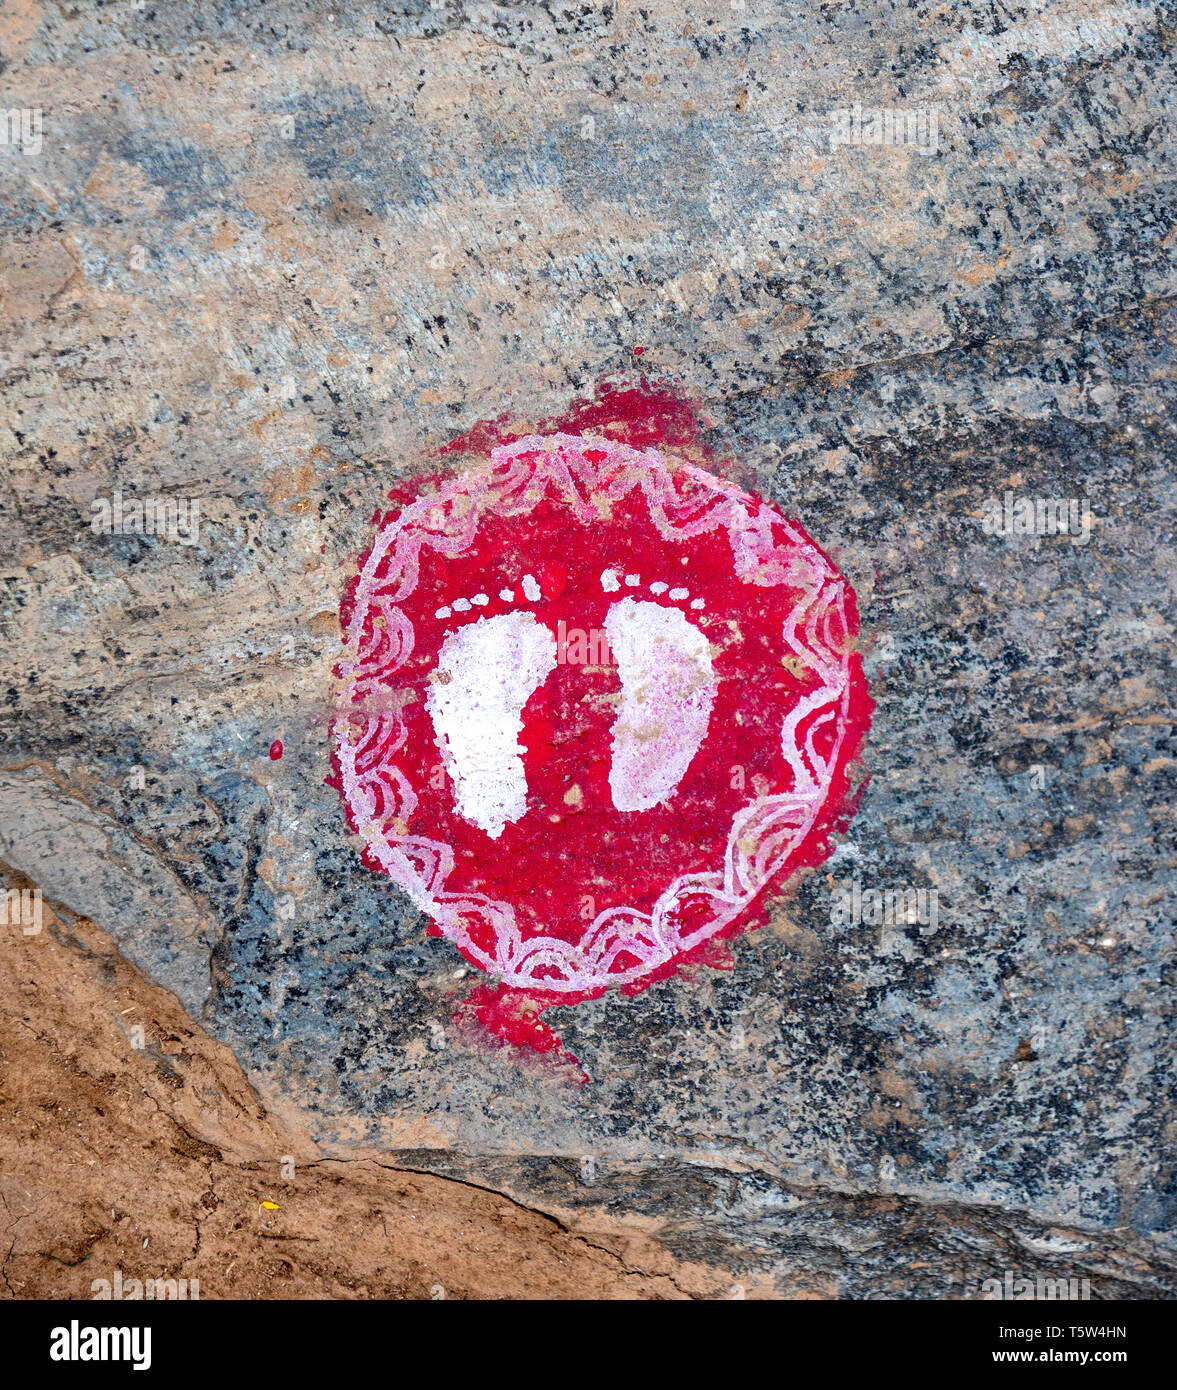 ' Footprints of the goddess ' Lakshmi in white on a red roundel bringing wealth and good fortune to the house in Supi village in Uttarakhand Himalayas Stock Photo